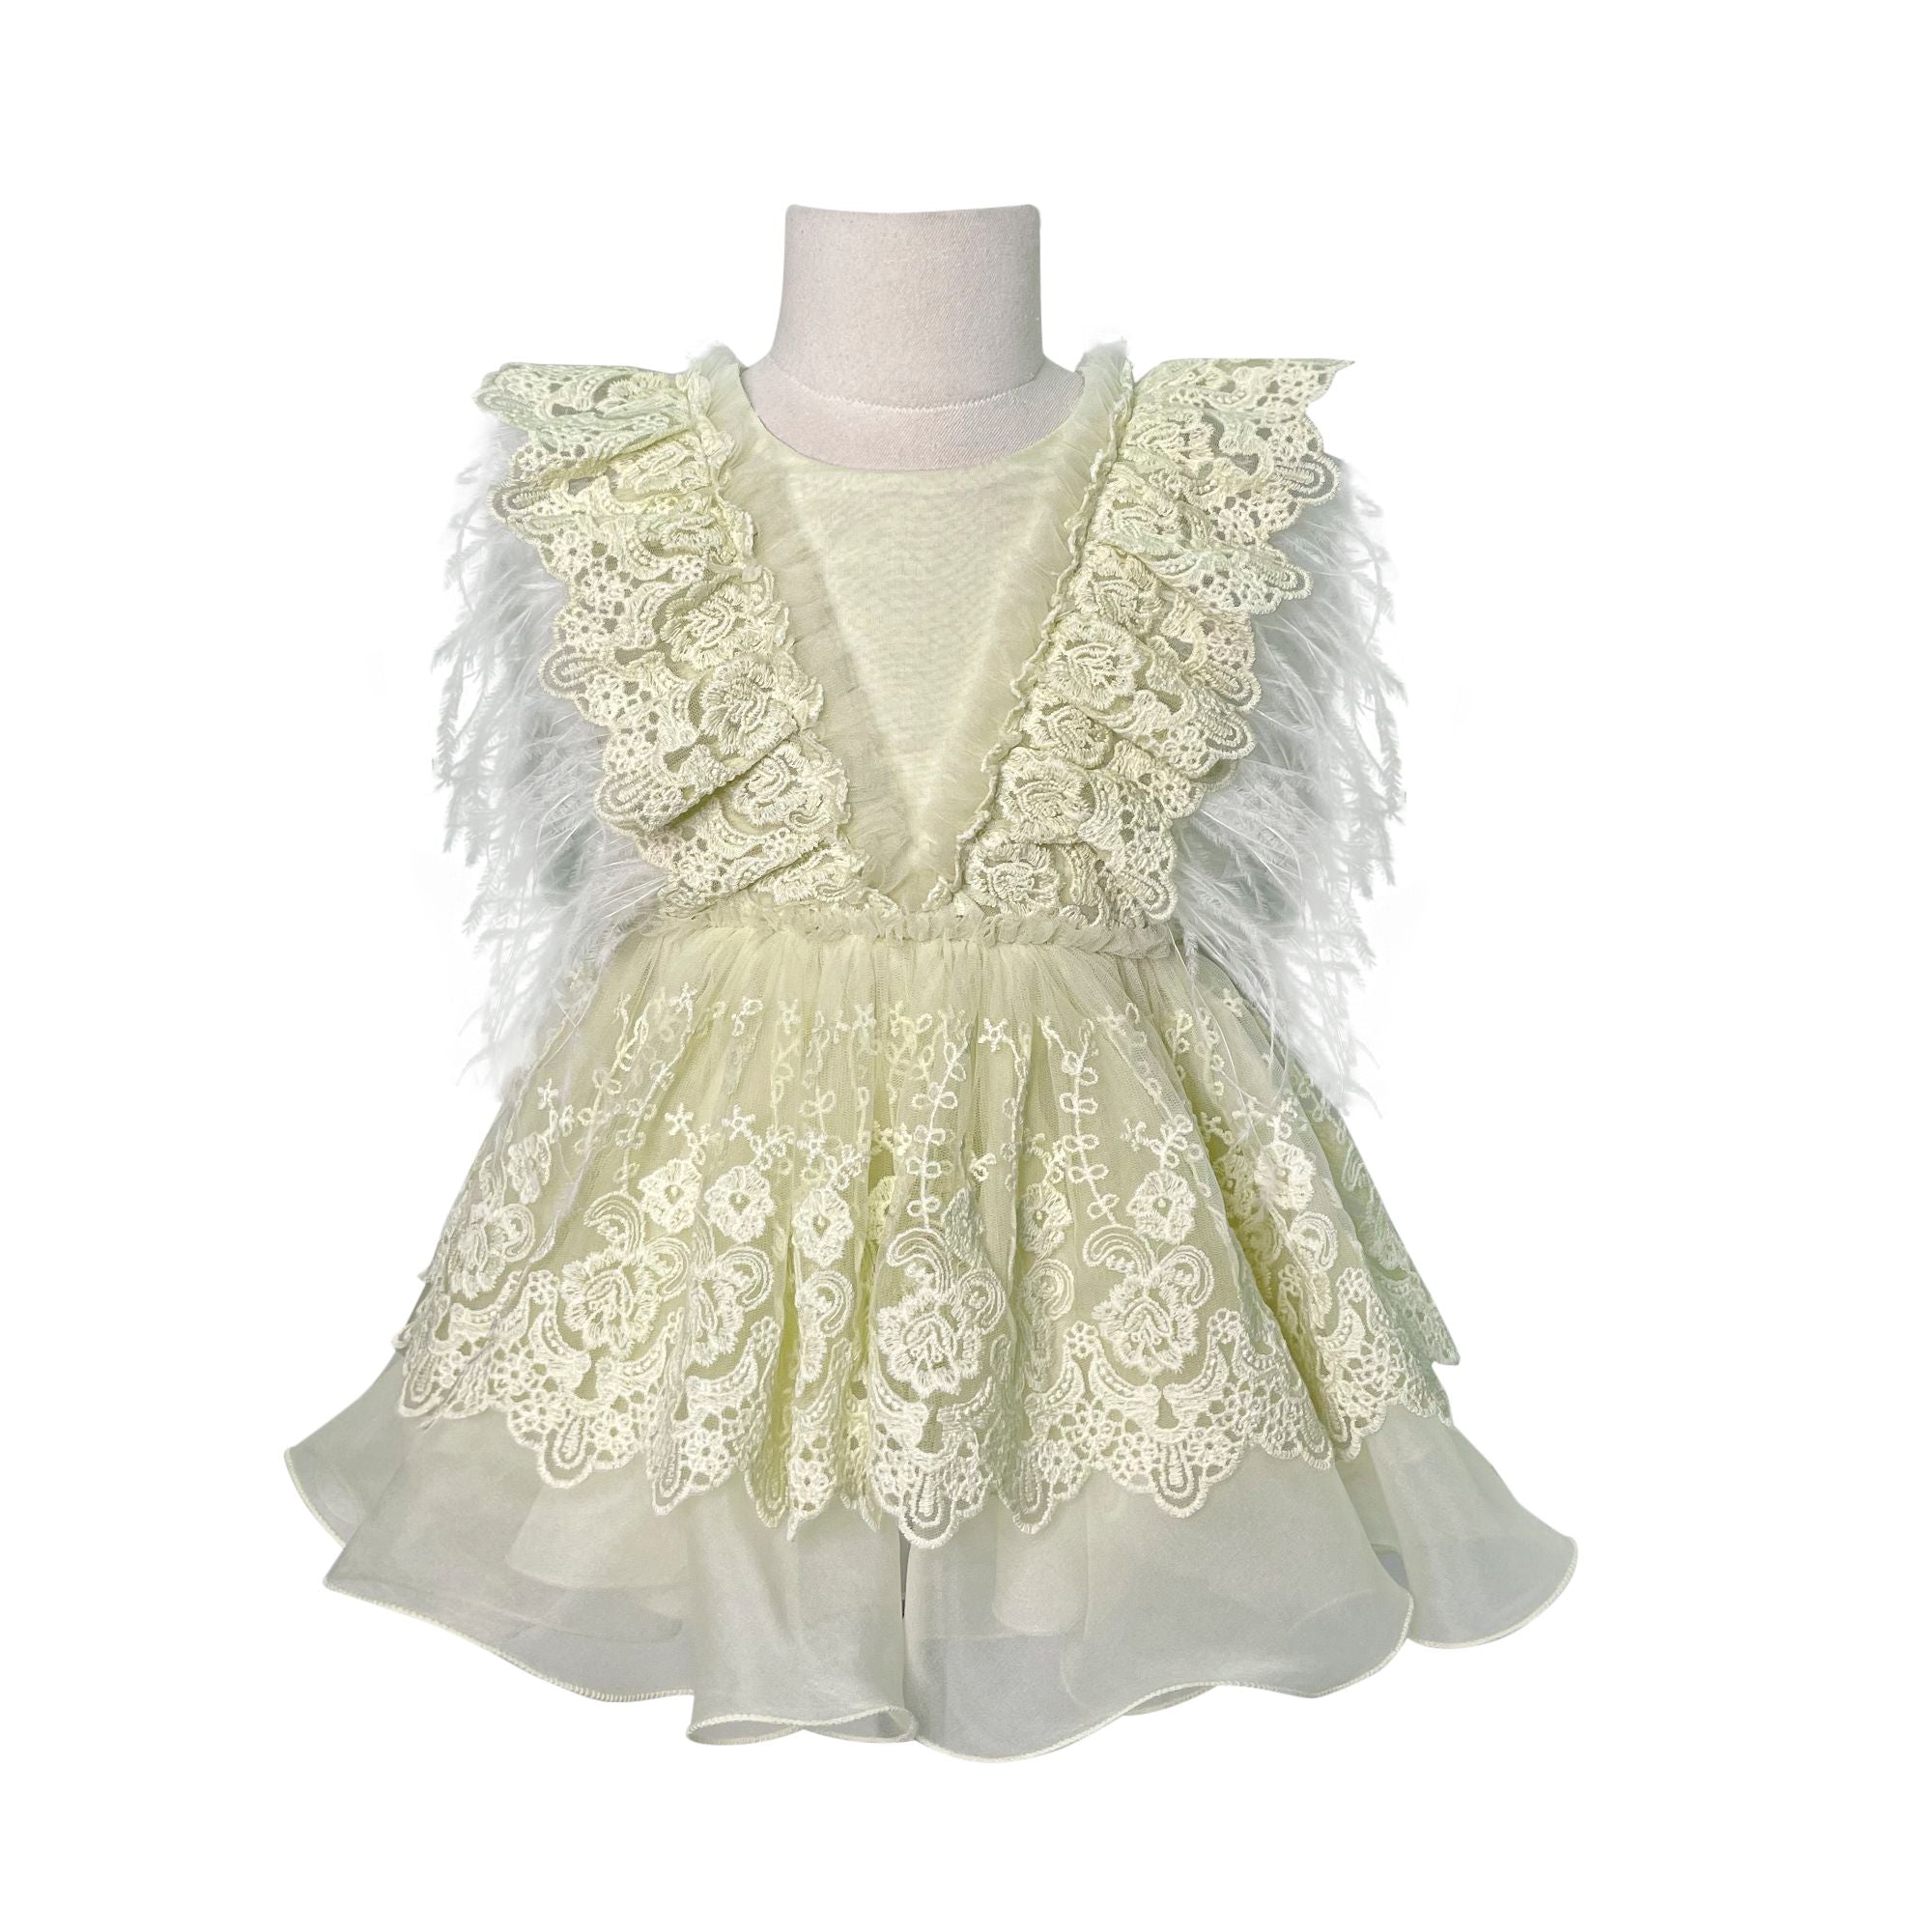 The Feather Fairy Dress (Green)